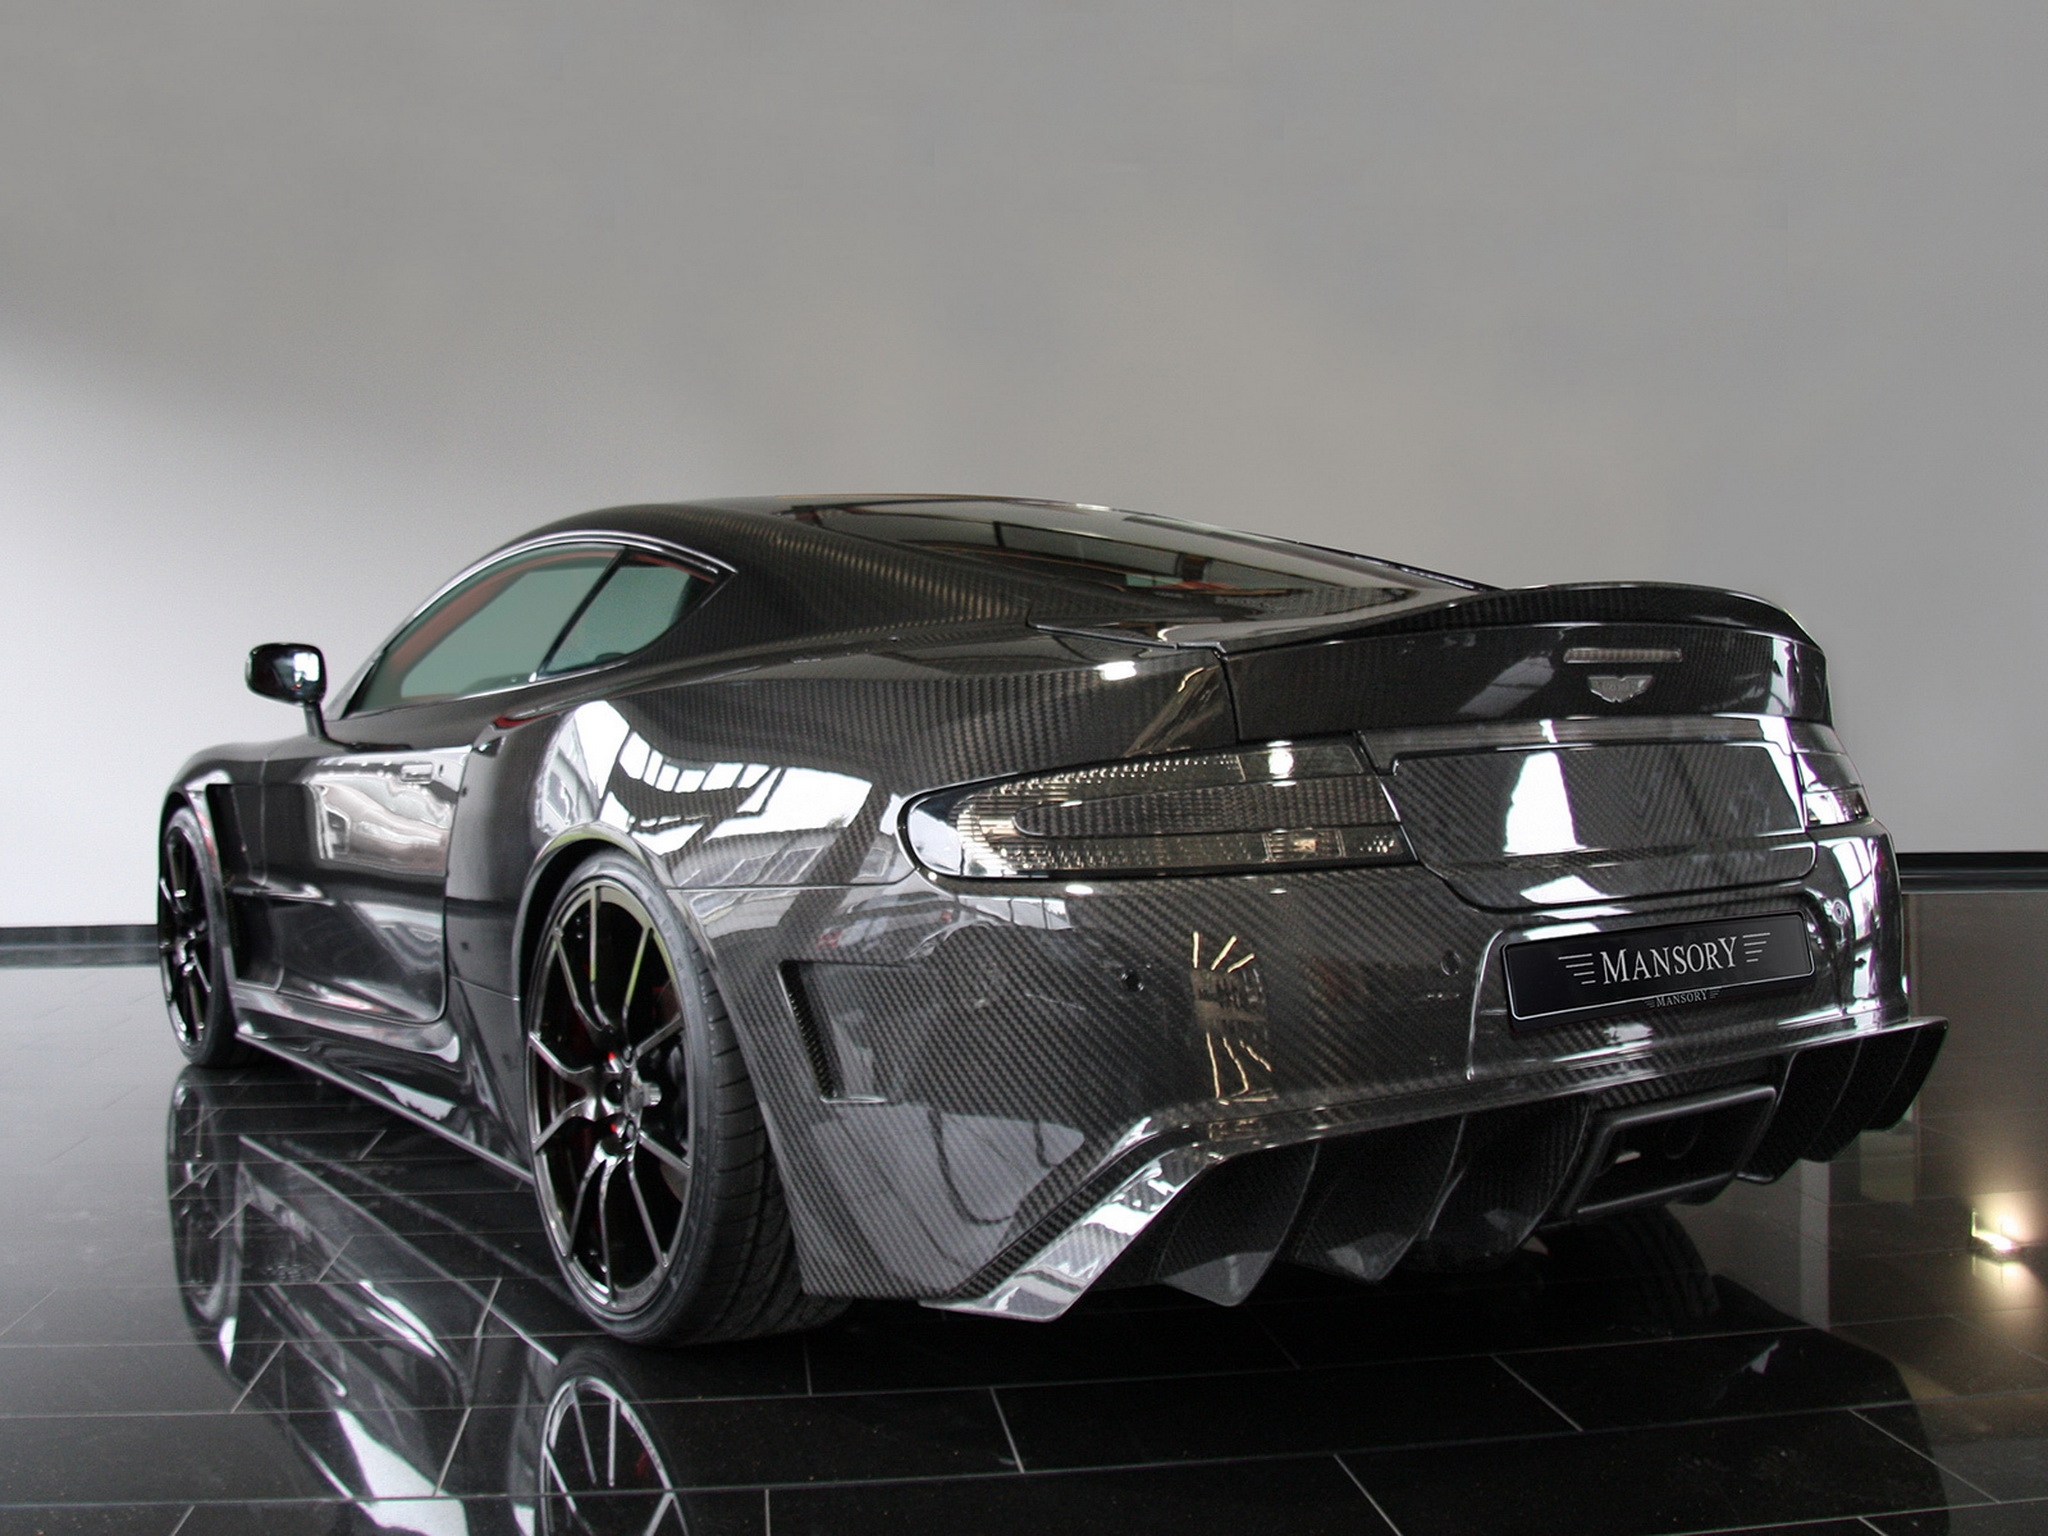 android black, cars, aston martin, carbon, reflection, back view, rear view, style, dbs, 2009, mansory